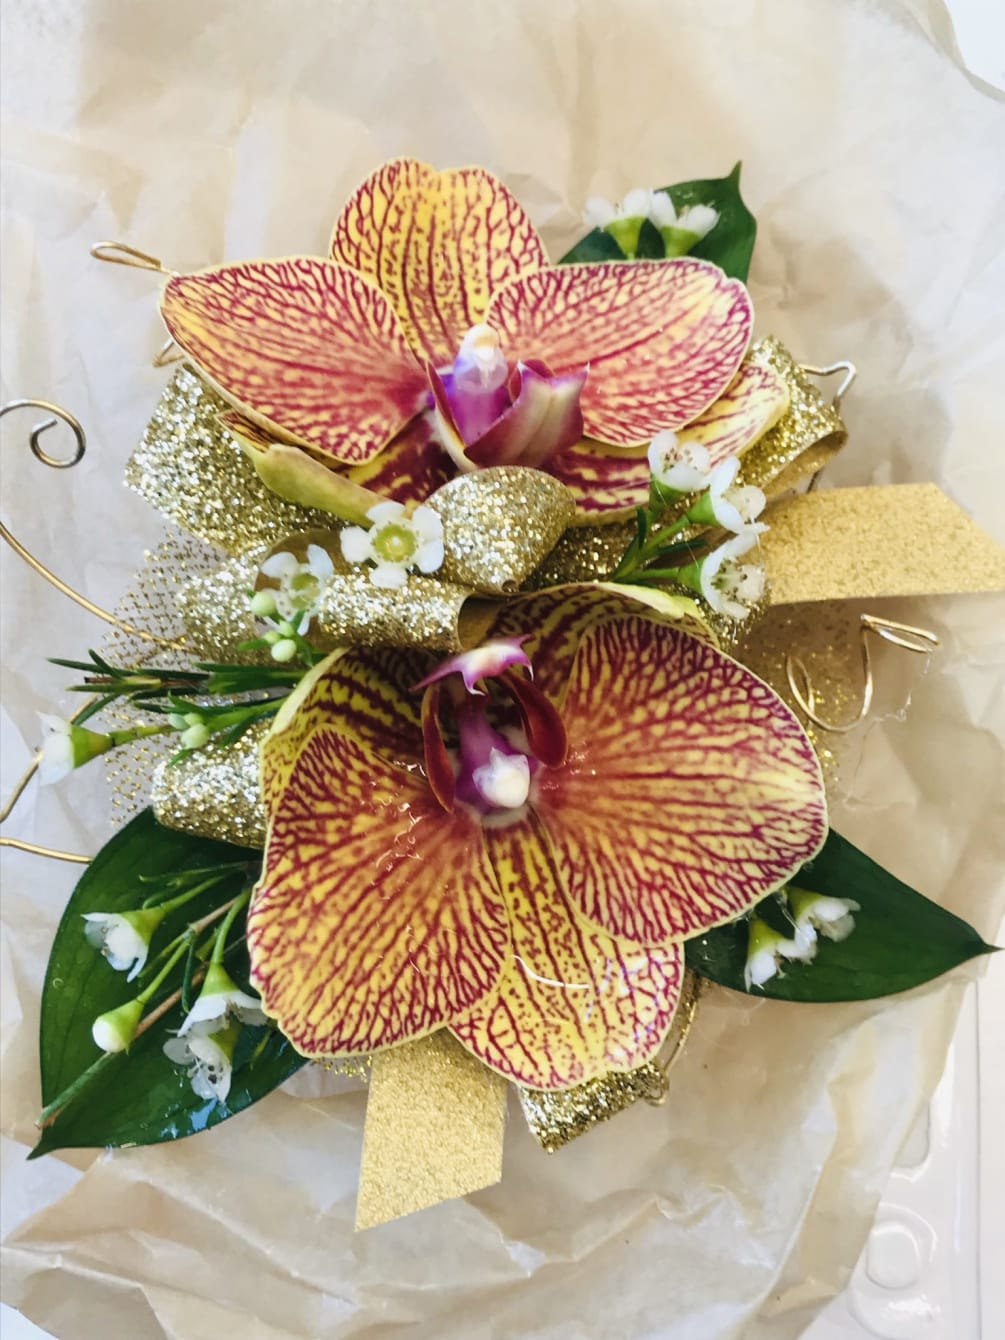 A double orchid wristlet made with the most beautiful orchids on the